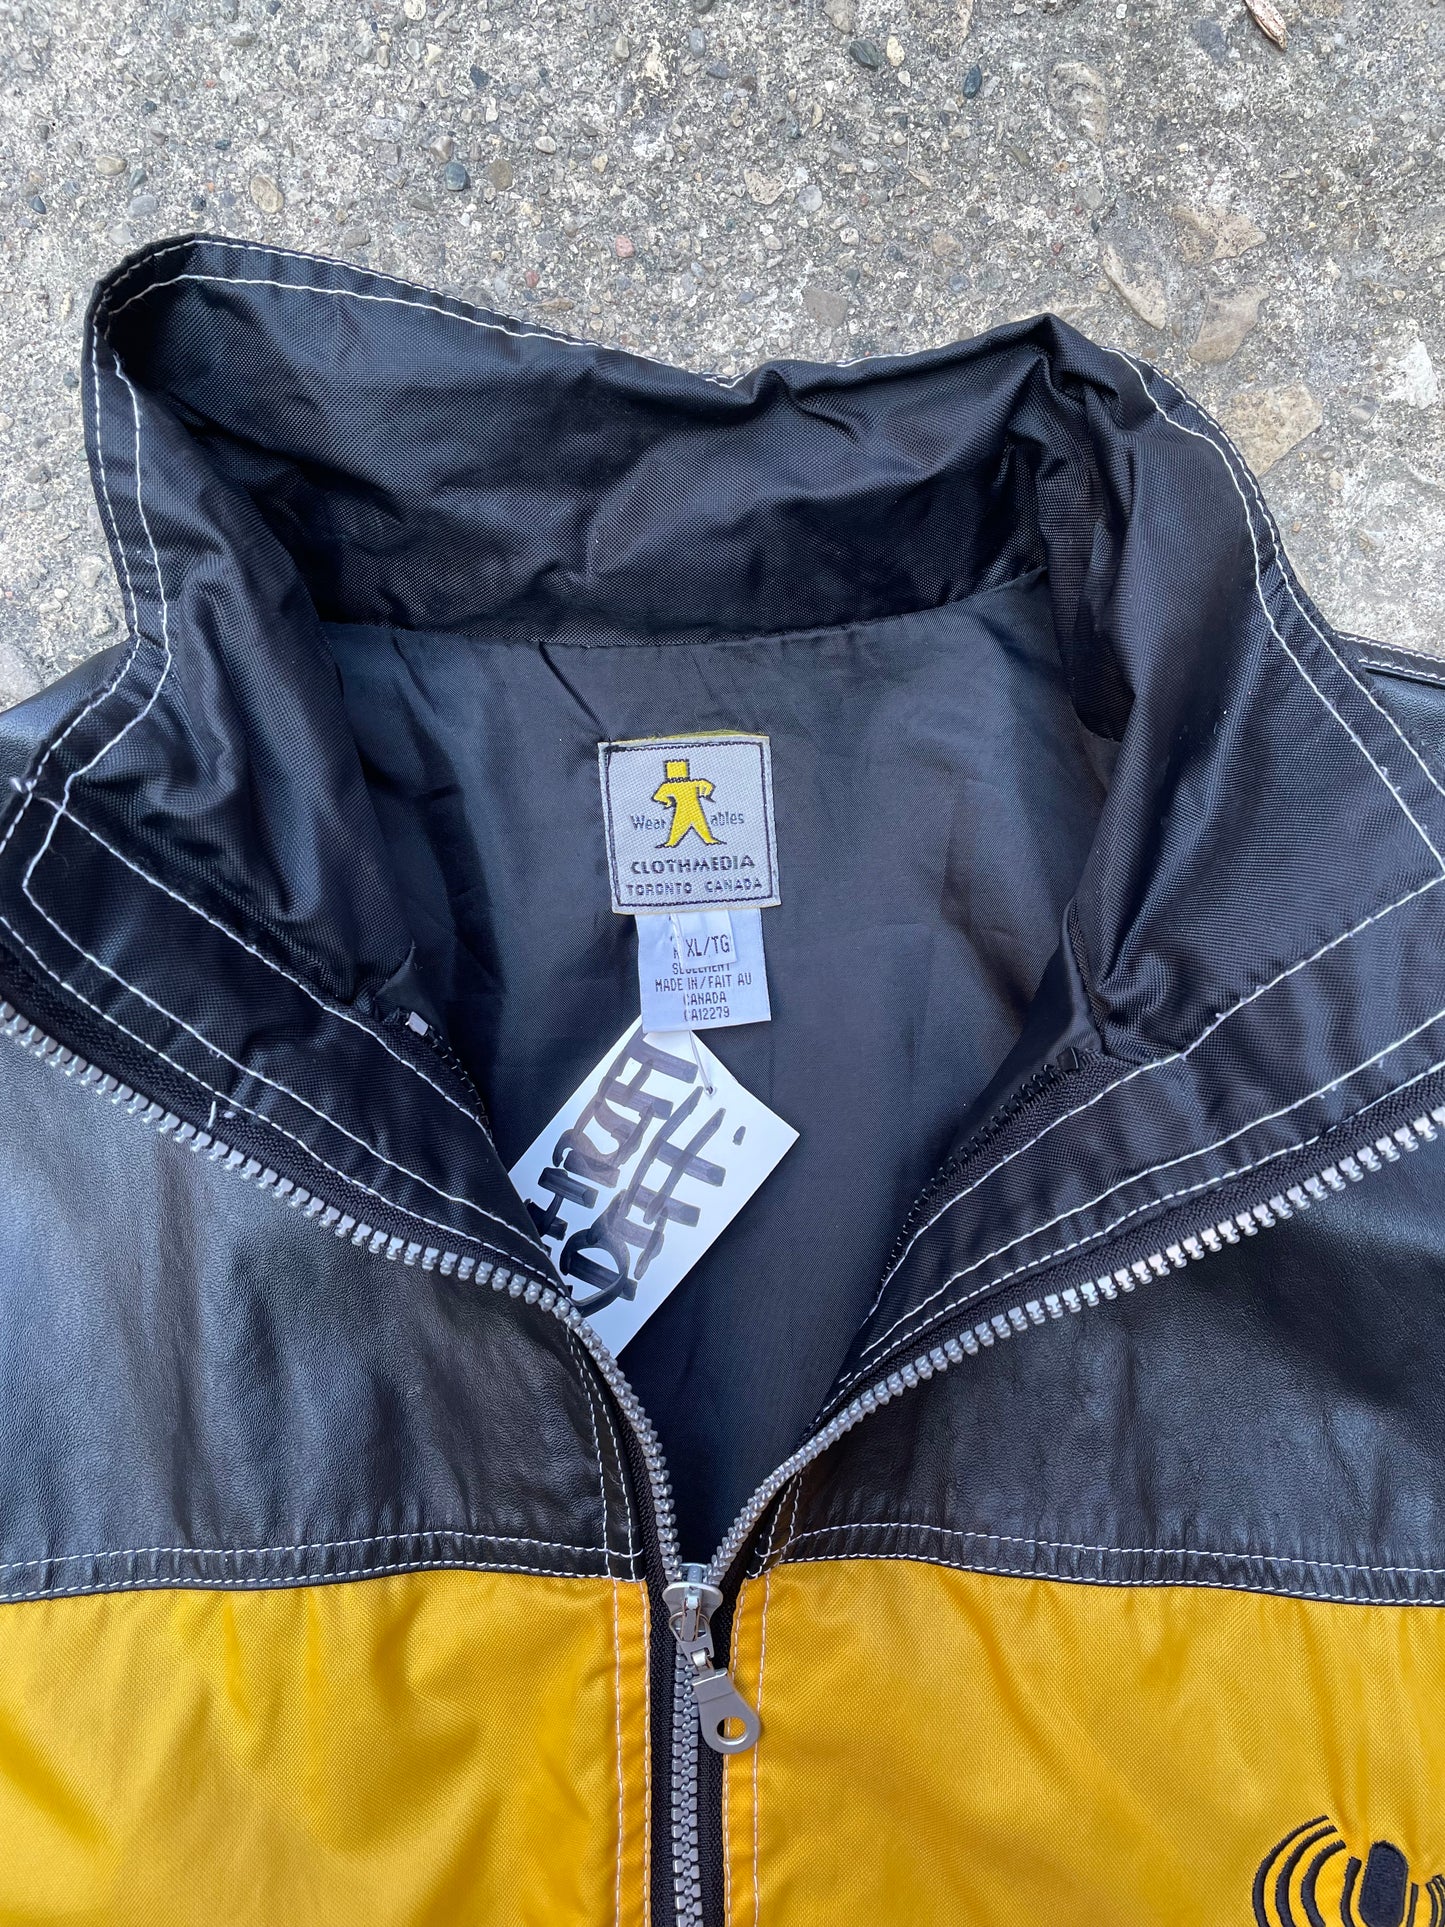 1990's Crunch Recording Group Jacket - XL